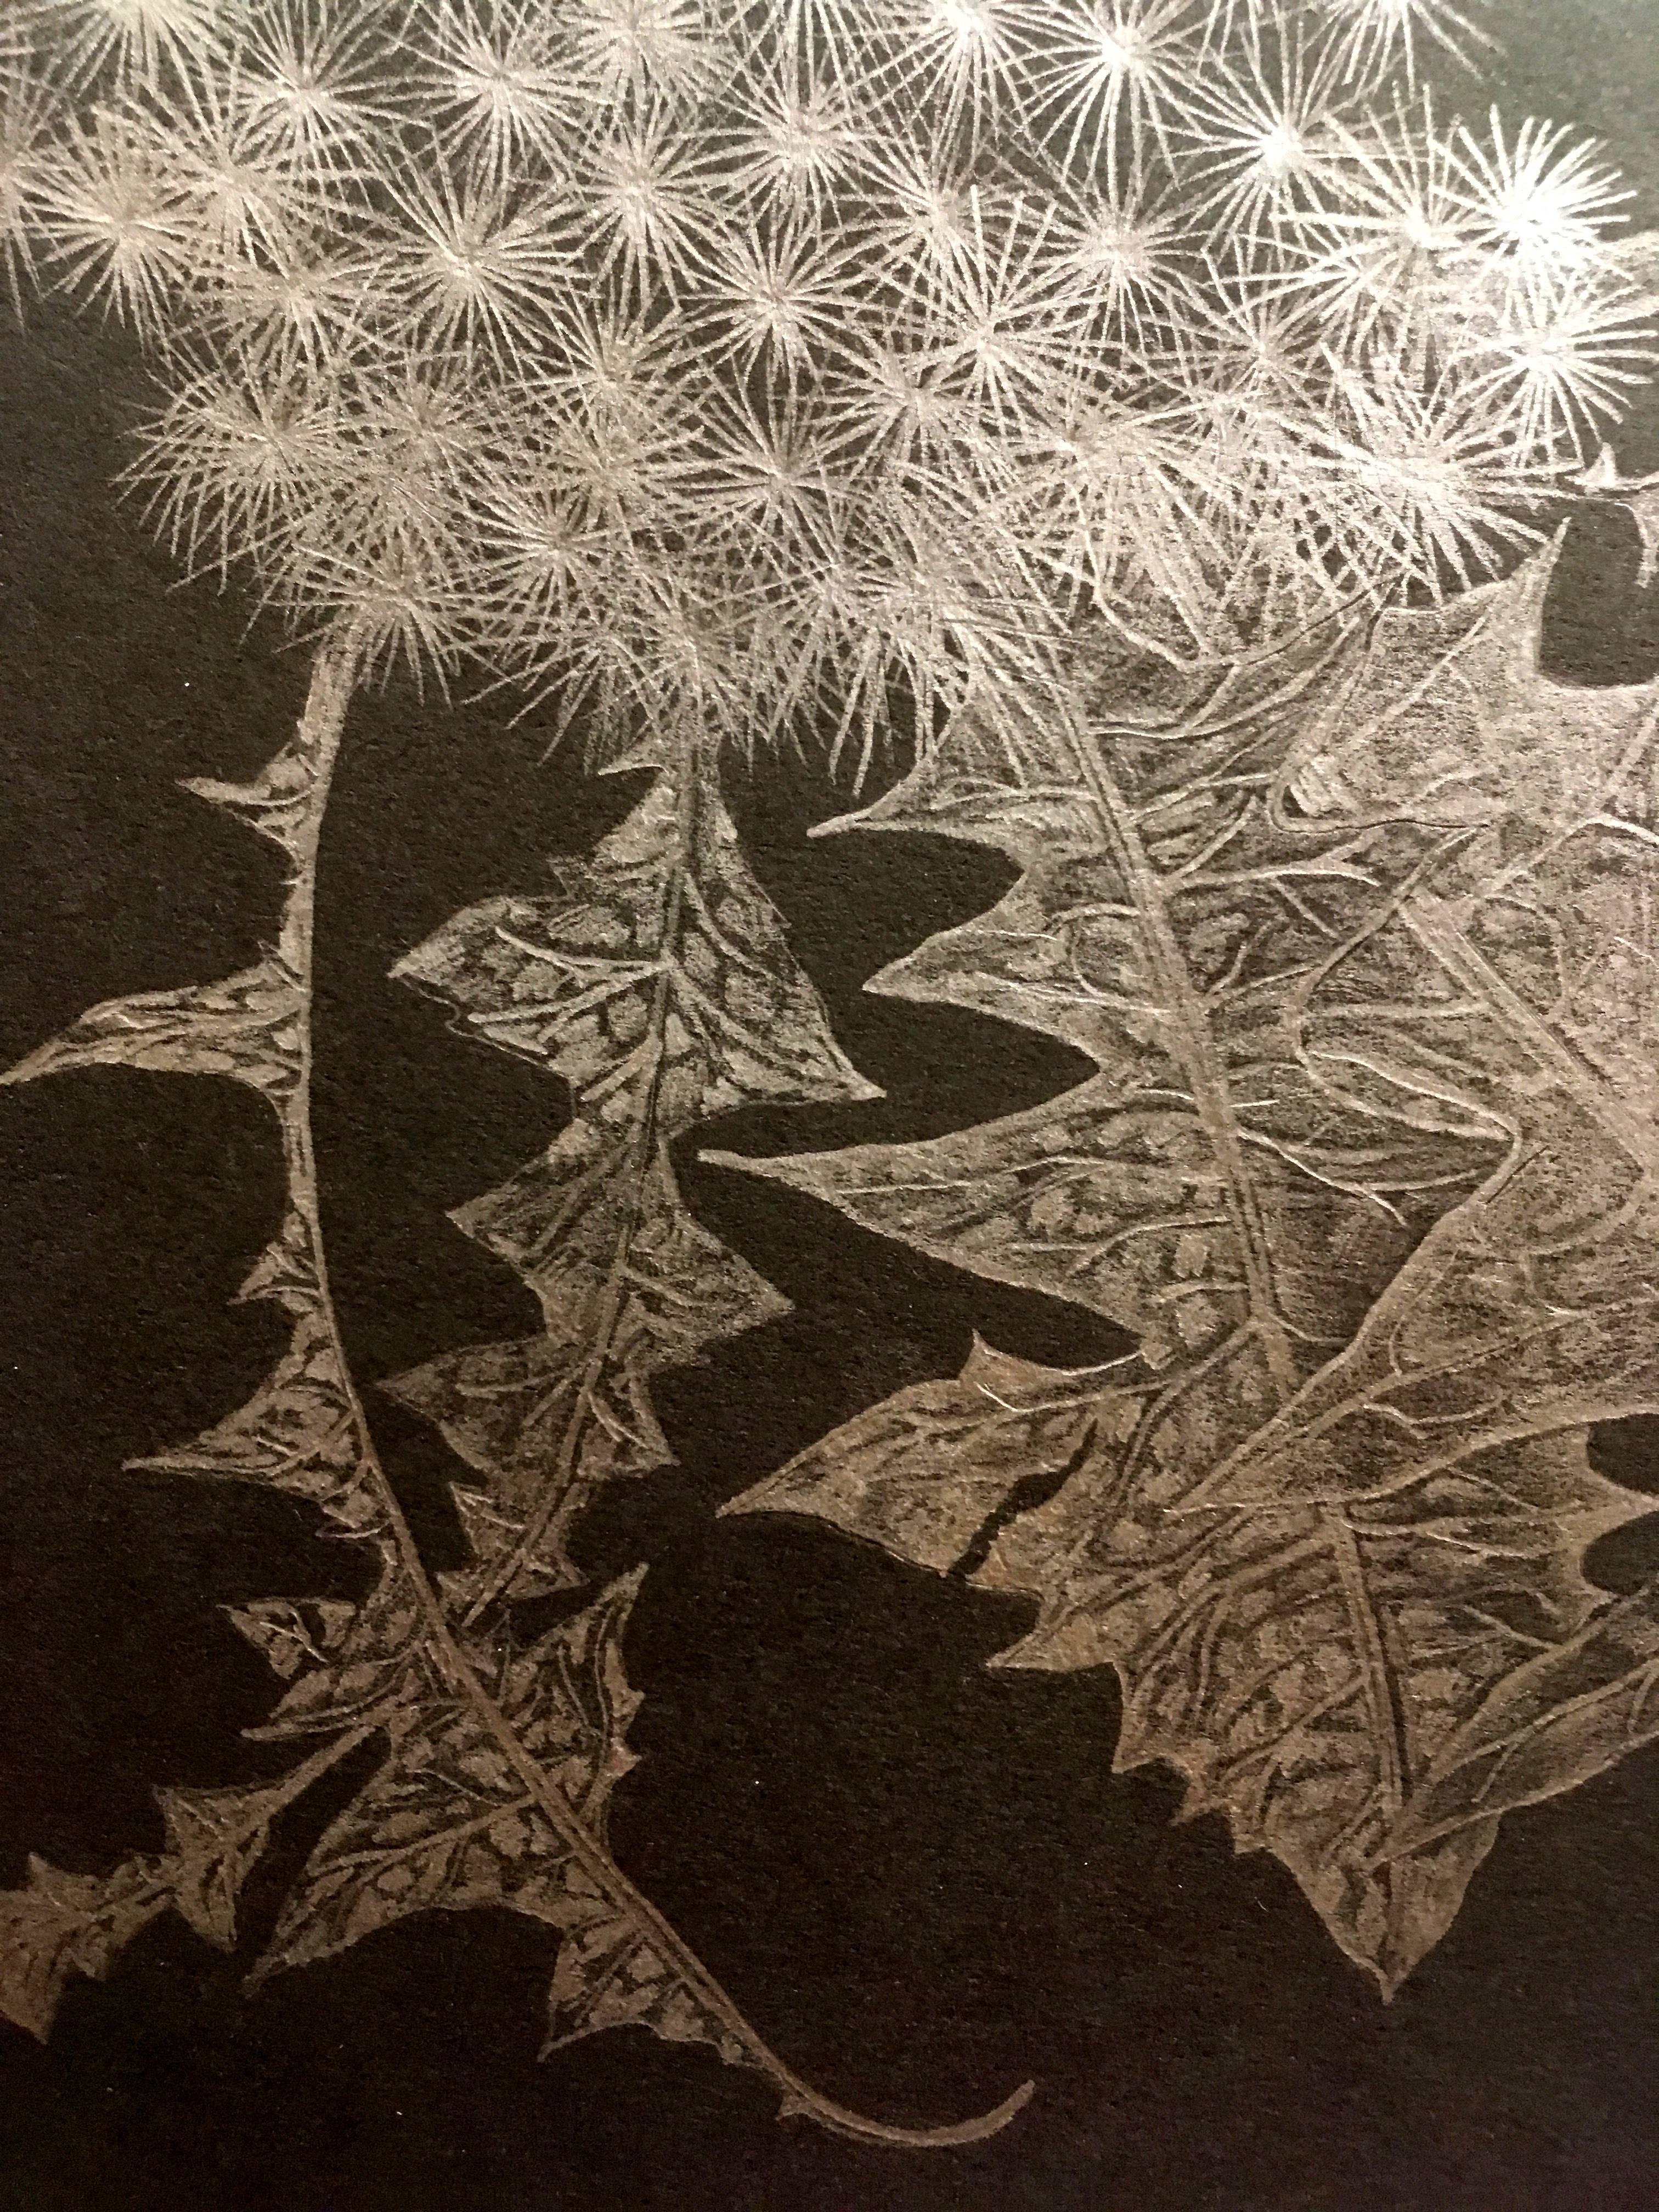 Margot Glass, Dandelion with Bud, realist graphite floral drawing on paper, 2018 2